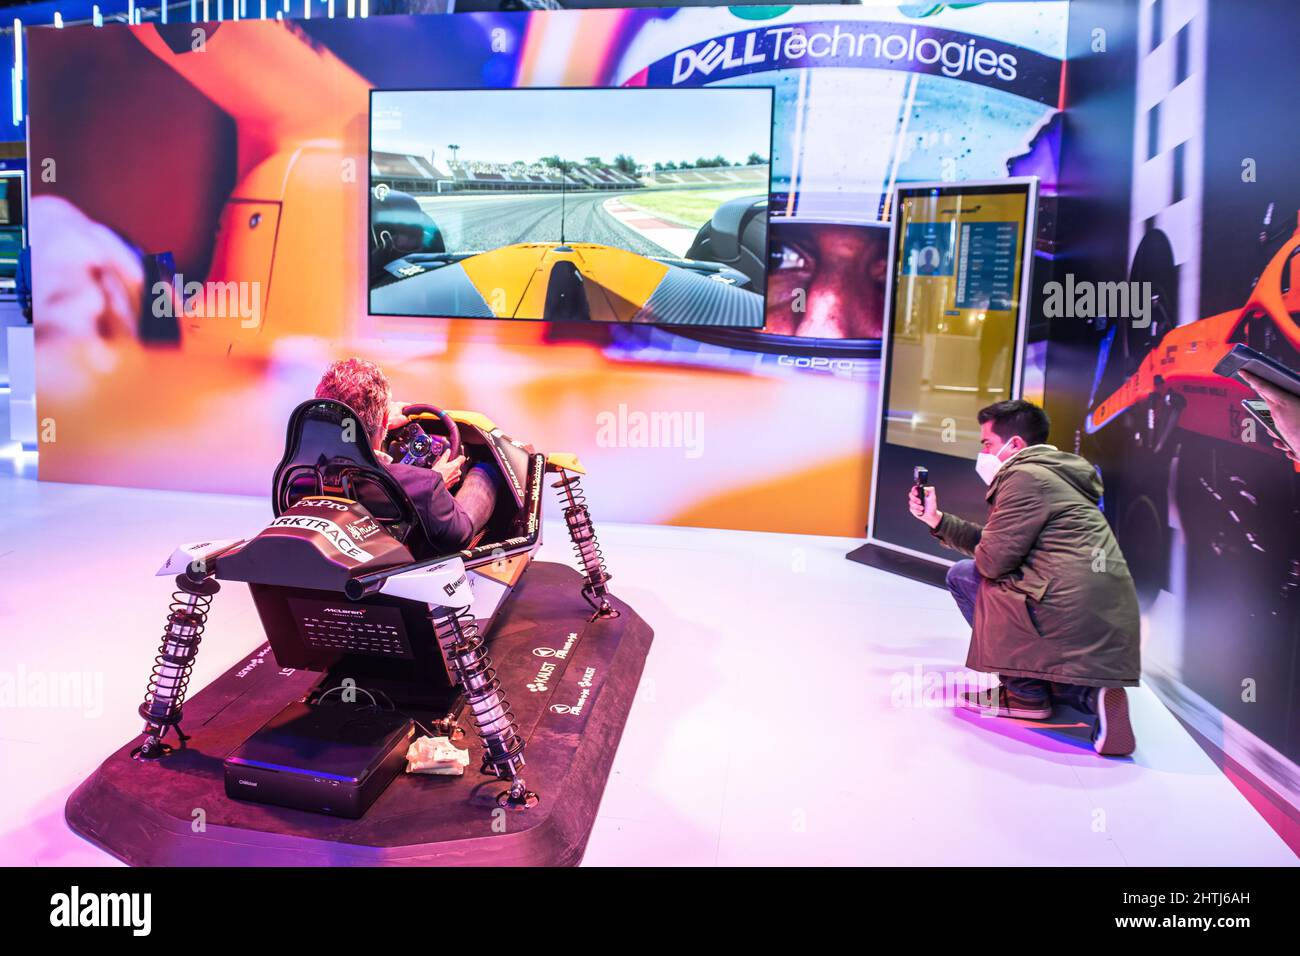 Barcelona, Spain. 28th Feb, 2022. A customer seen testing a car simulator at a Dell booth during the first day of Mobile World Congress 2022 (MWC) at the Fira de Barcelona. Credit: SOPA Images Limited/Alamy Live News Stock Photo